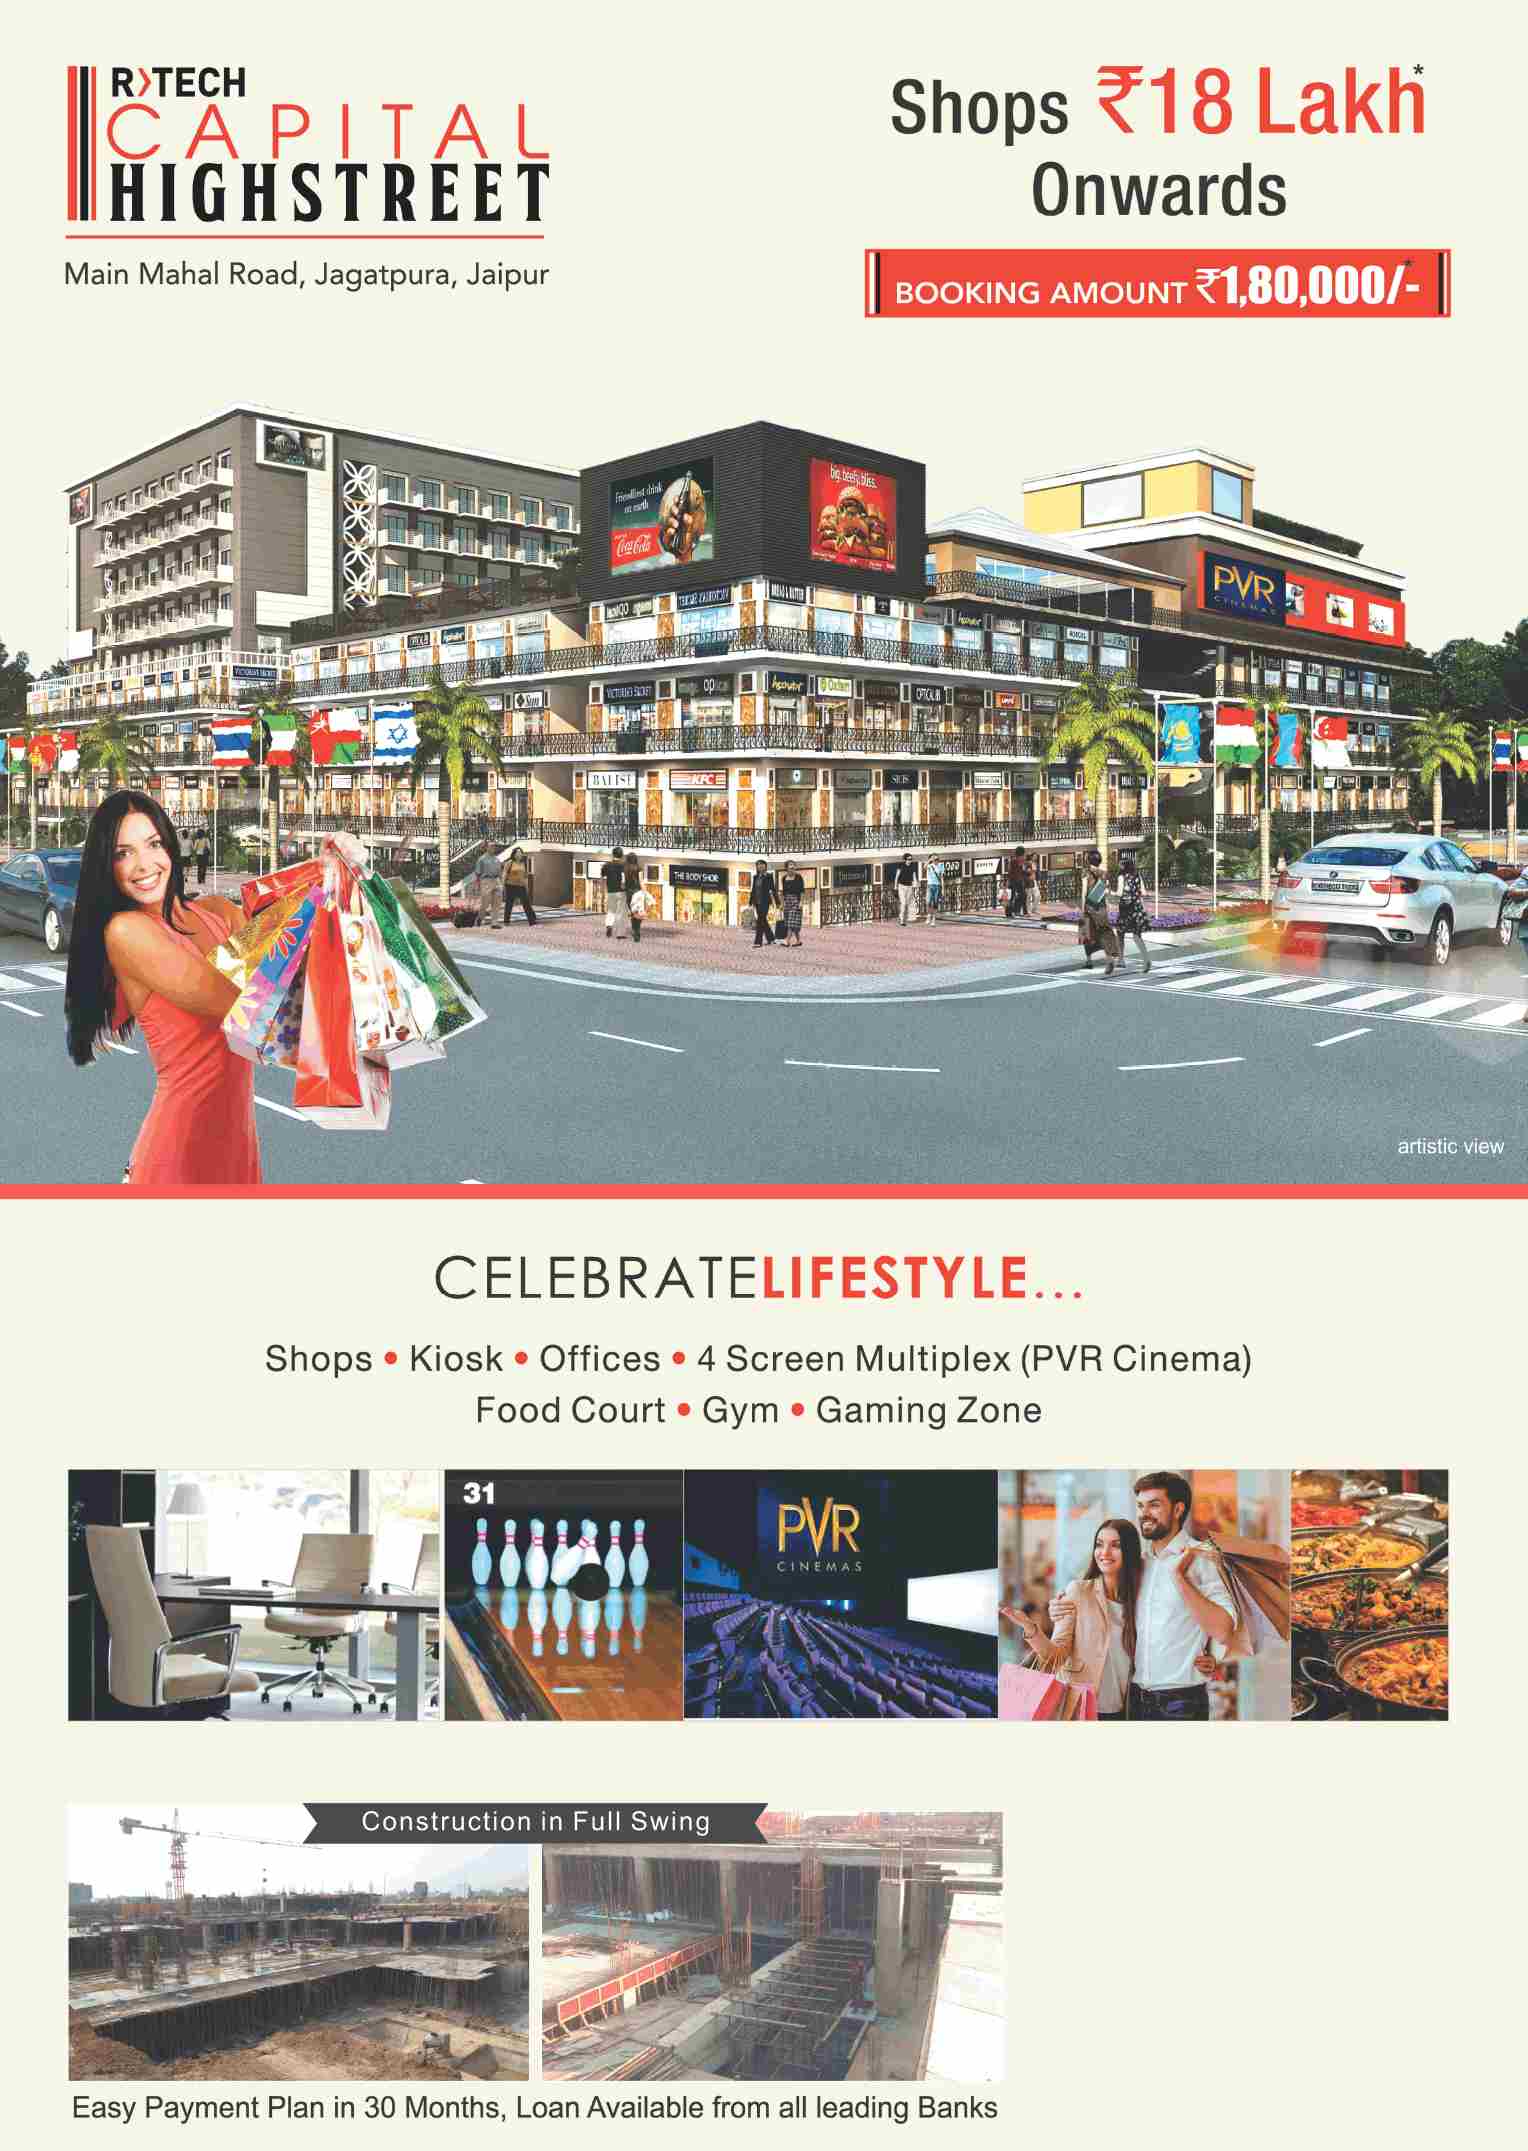 Book shops at R Tech Capital Highstreet starting at Rs. 18 Lacs in Bhiwadi Update